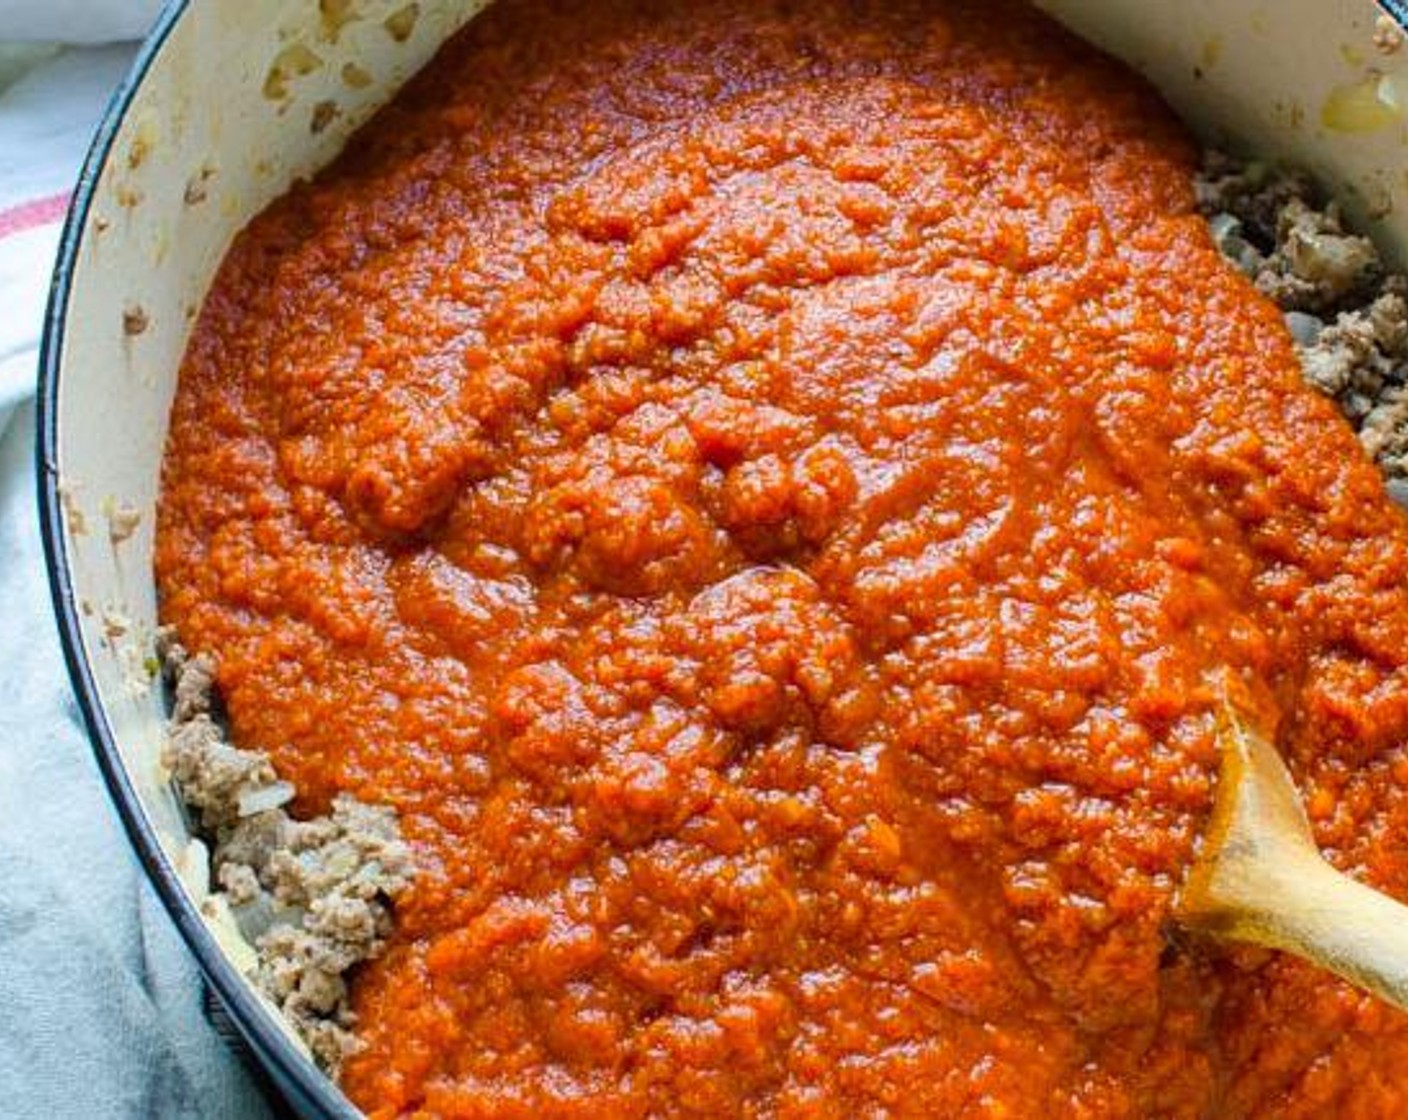 step 3 Cook until the meat is browned. Remove any excess fat from the browned meat and discard. Add Bay Leaves (2), Dried Basil (1 tsp), Dried Oregano (1 tsp), Crushed Red Pepper Flakes (1/4 tsp), and RAGÚ® Simply Chunky Marinara Pasta Sauce (4 cups). Stir to combine.